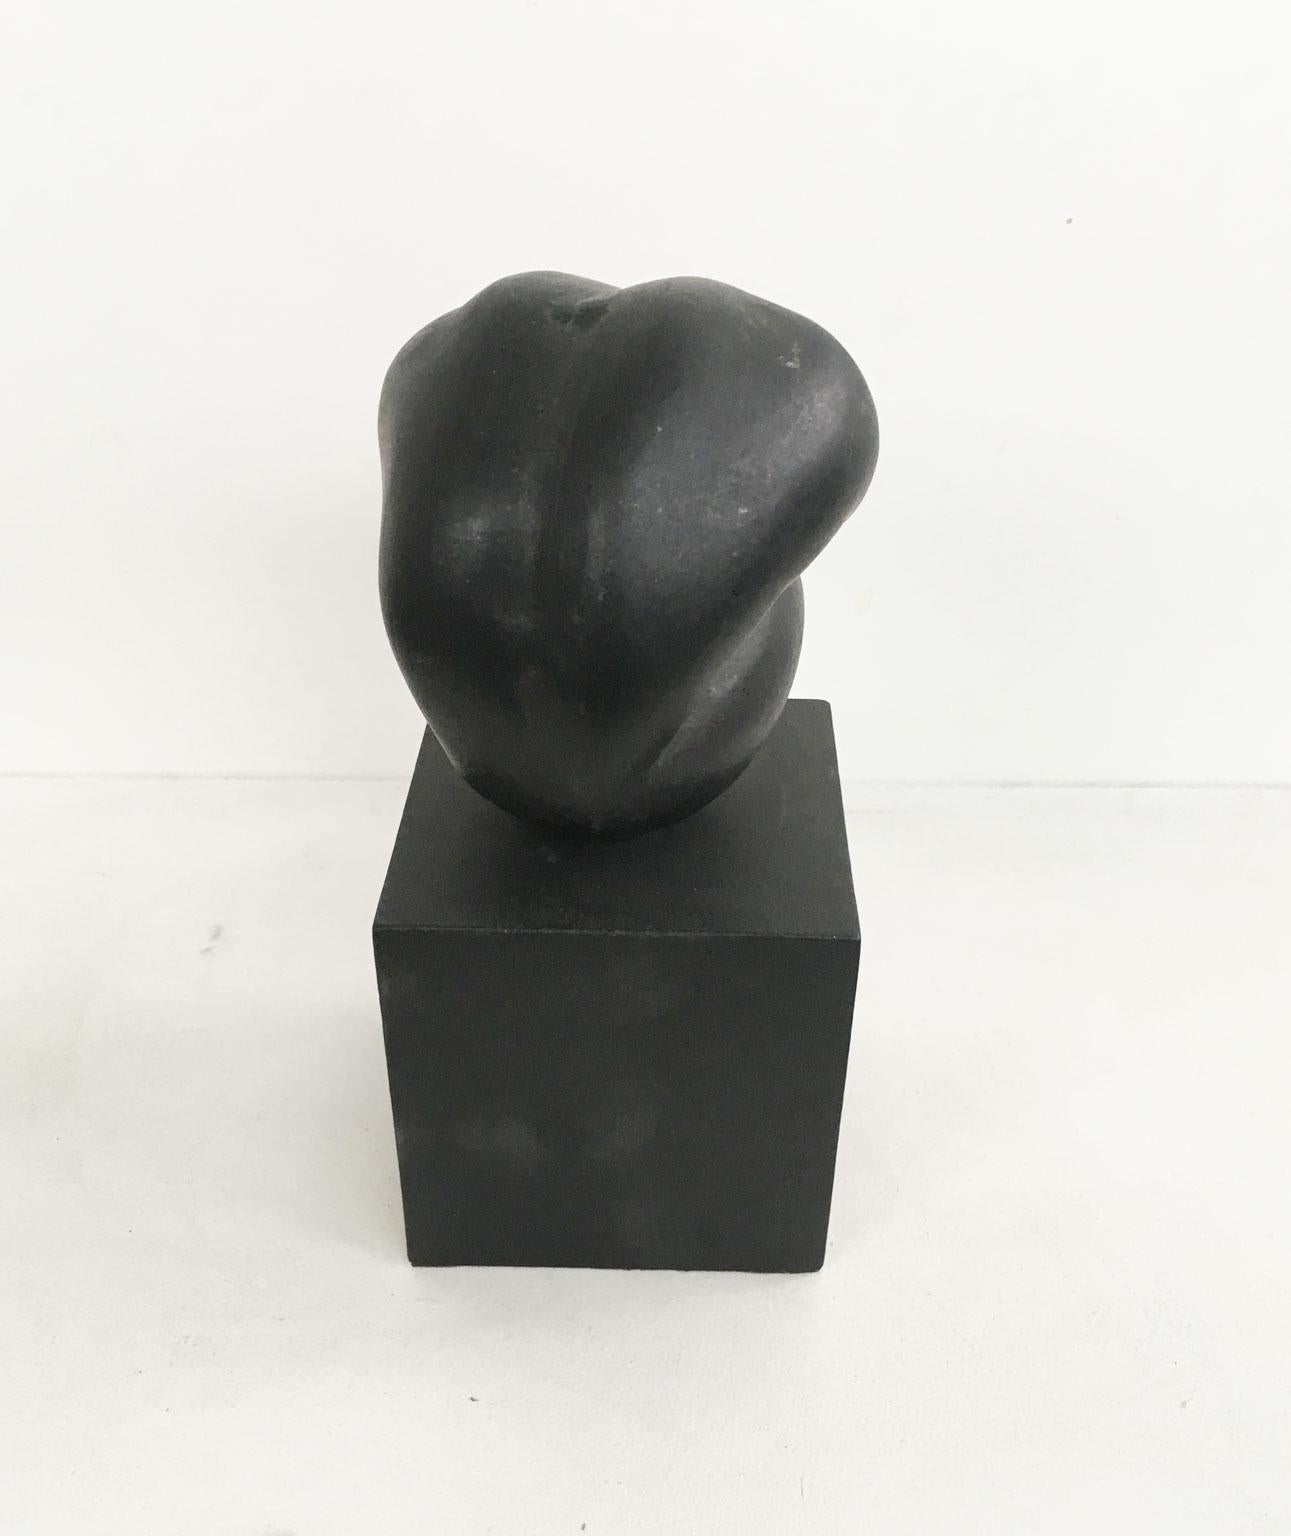 1988 Italy Black Aluminum Abstract Sculpture by Patrizia Guerresi Title Deji For Sale 8